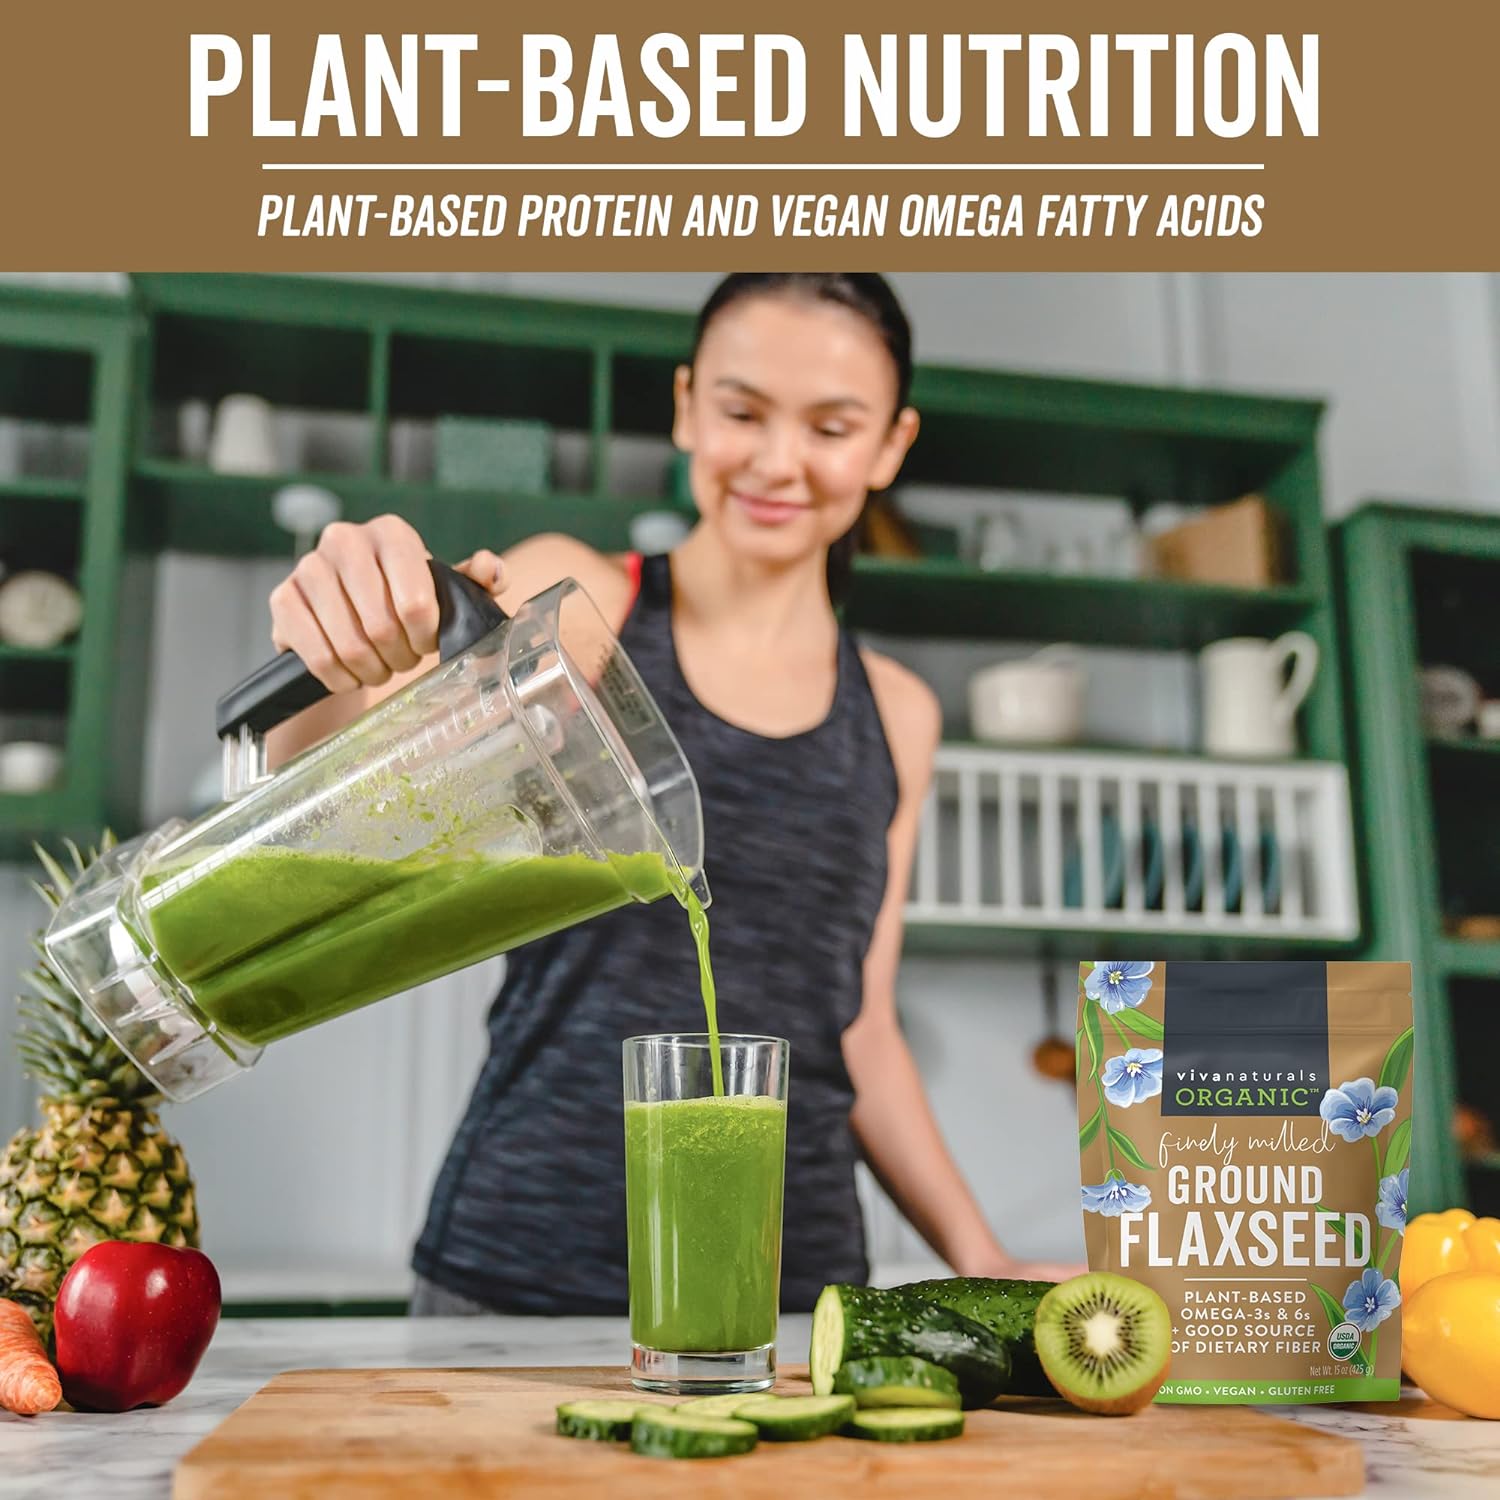 Viva Naturals Organic Ground Flaxseed - Premium Quality Plant-Based Protein and Vegan Omega 3 with Fiber, Perfect for Smoothies, Non-GMO and Gluten Free, 15 oz (425 g) : Health & Household